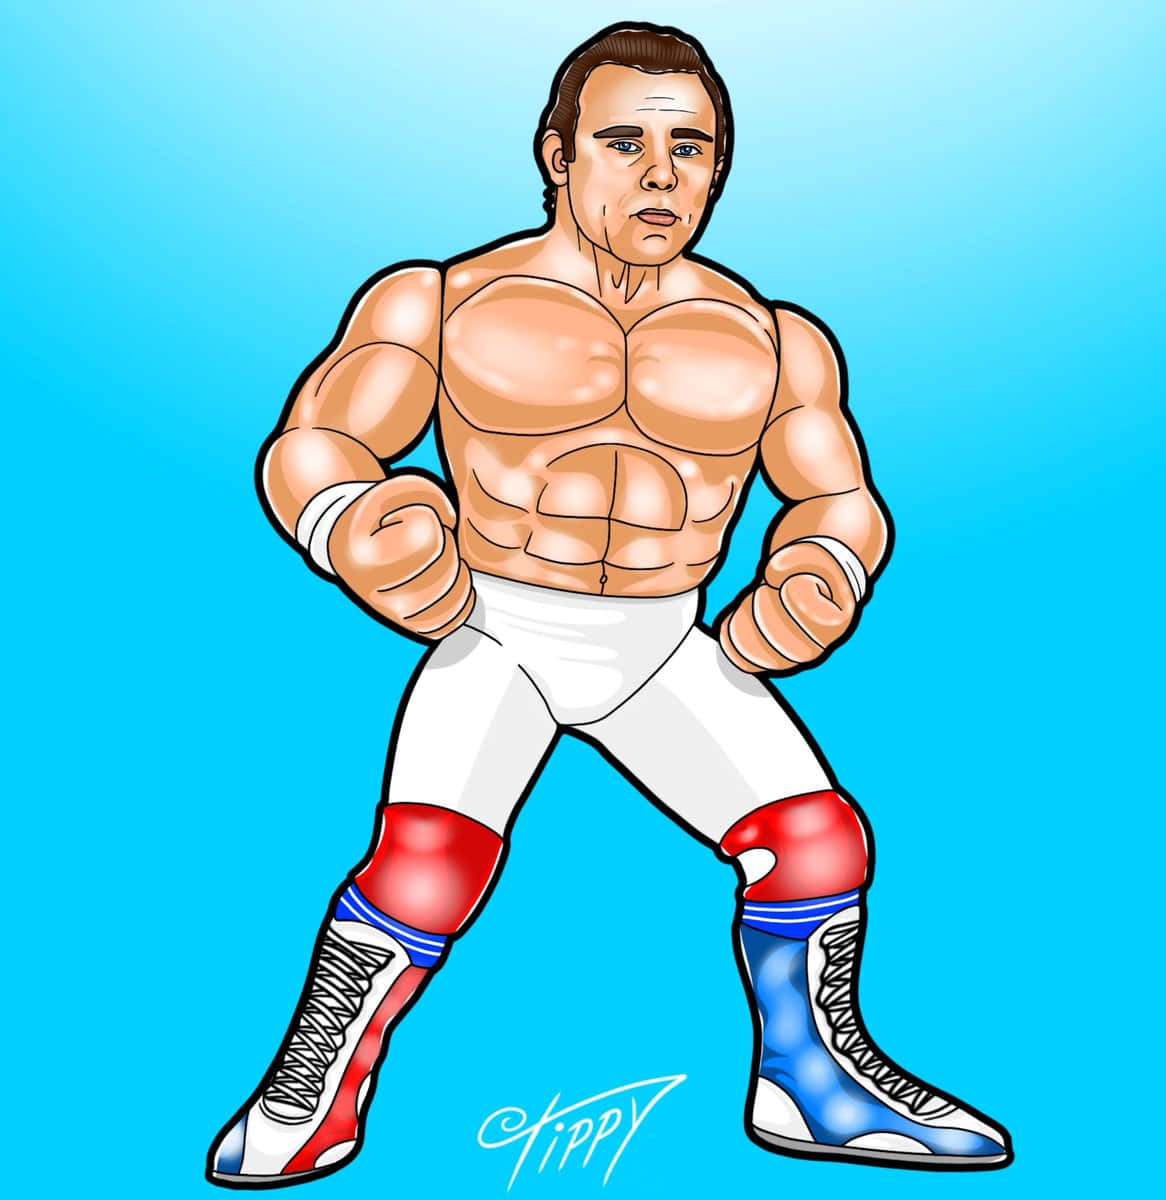 Thomas "Dynamite Kid" Billington displaying his athletic prowess in wrestling ring. Wallpaper